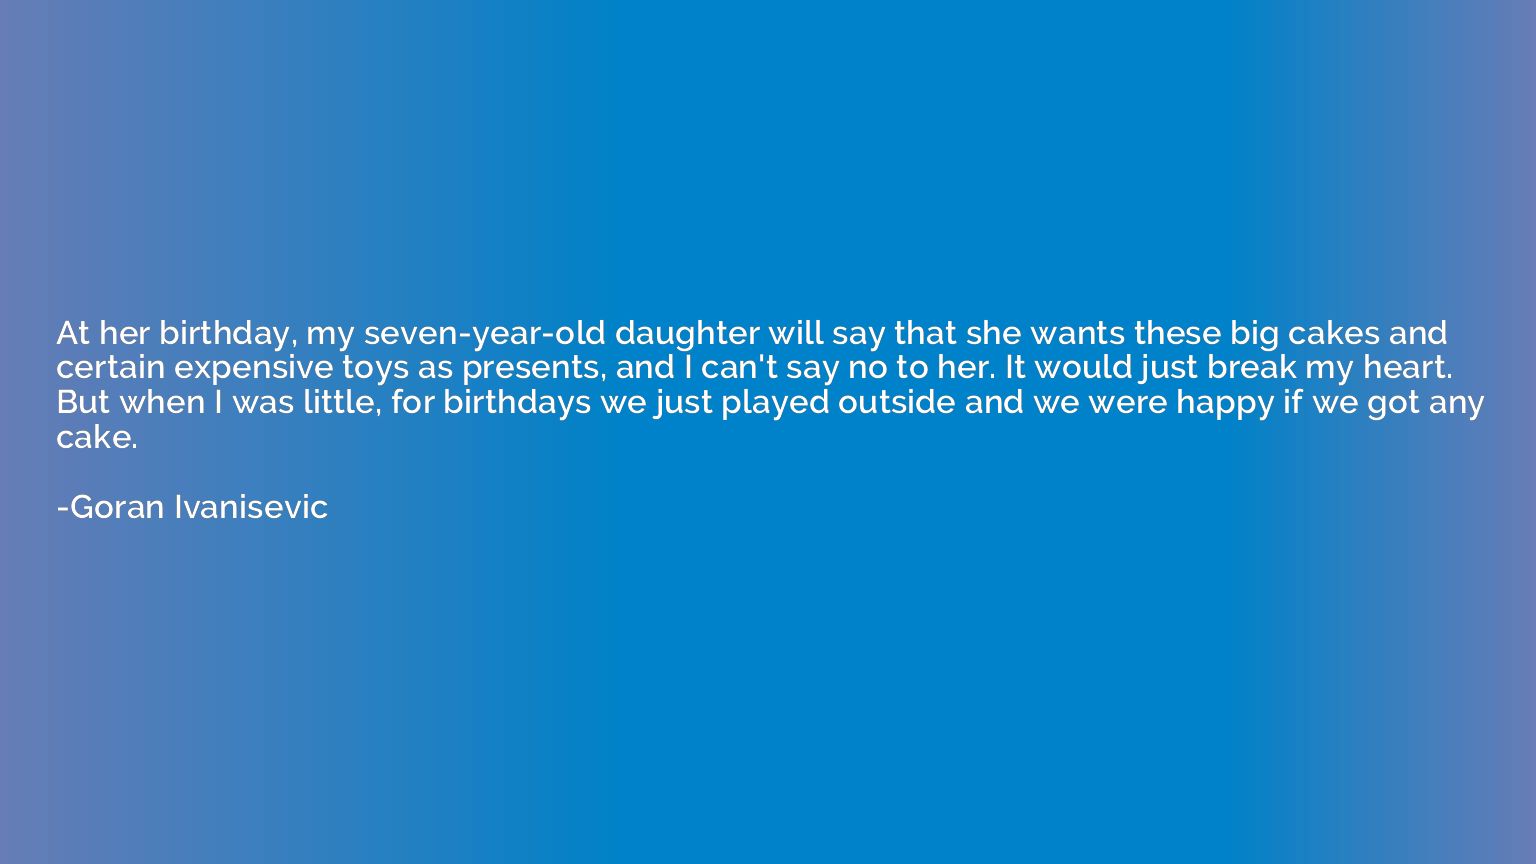 At her birthday, my seven-year-old daughter will say that sh